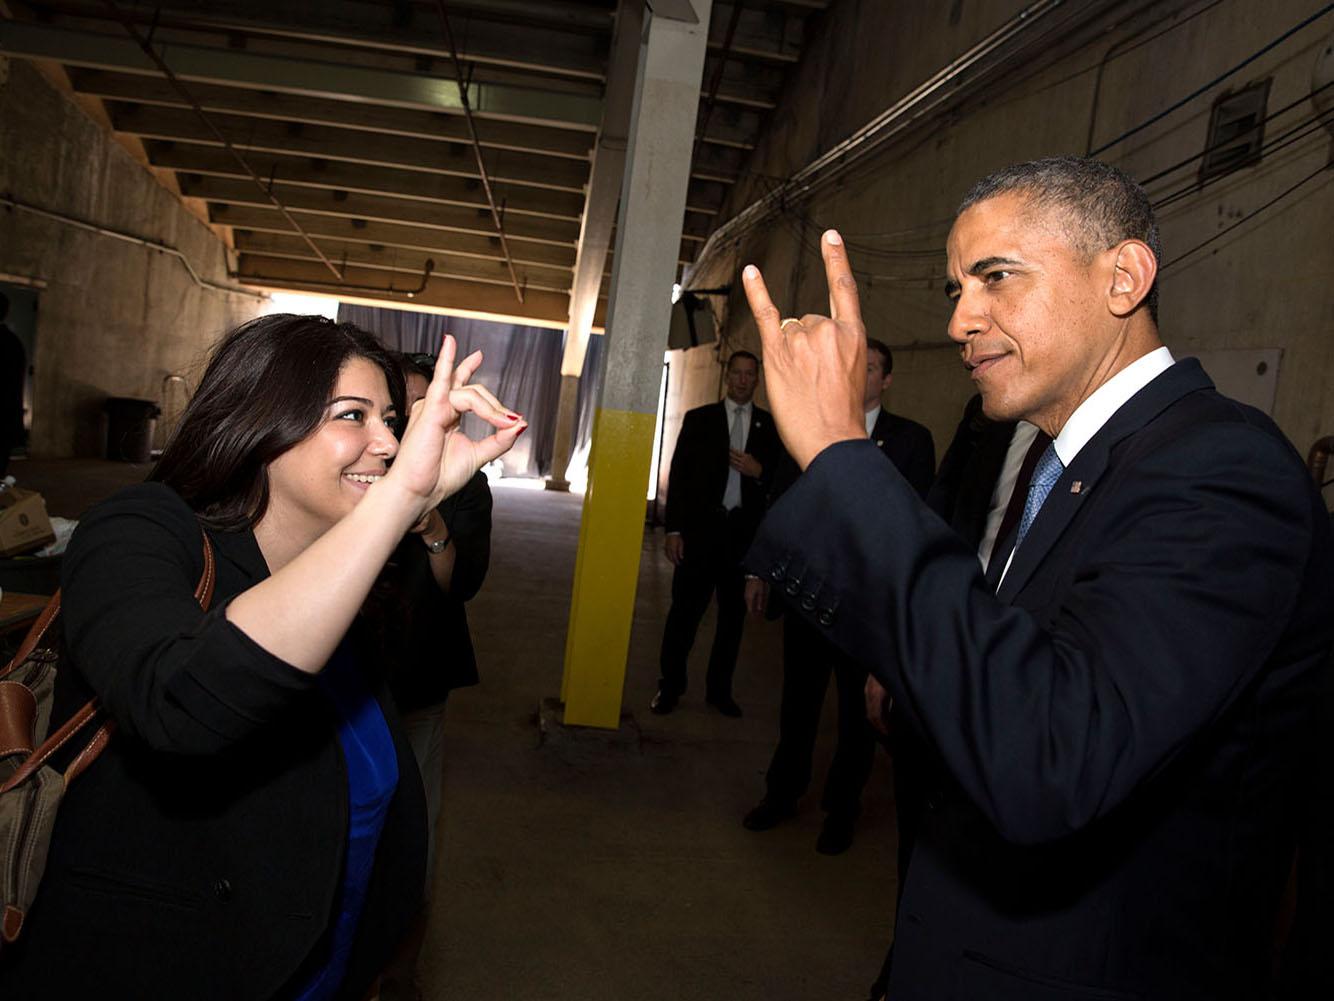 President Barack Obama's Personal Secretary Ferial Govashiri shows him how to make the sign of the anteater, mascot of the University of California, Irvine, prior to the UCI commencement at Angels Stadium in Anaheim, Calif., Saturday, June 14, 2014.